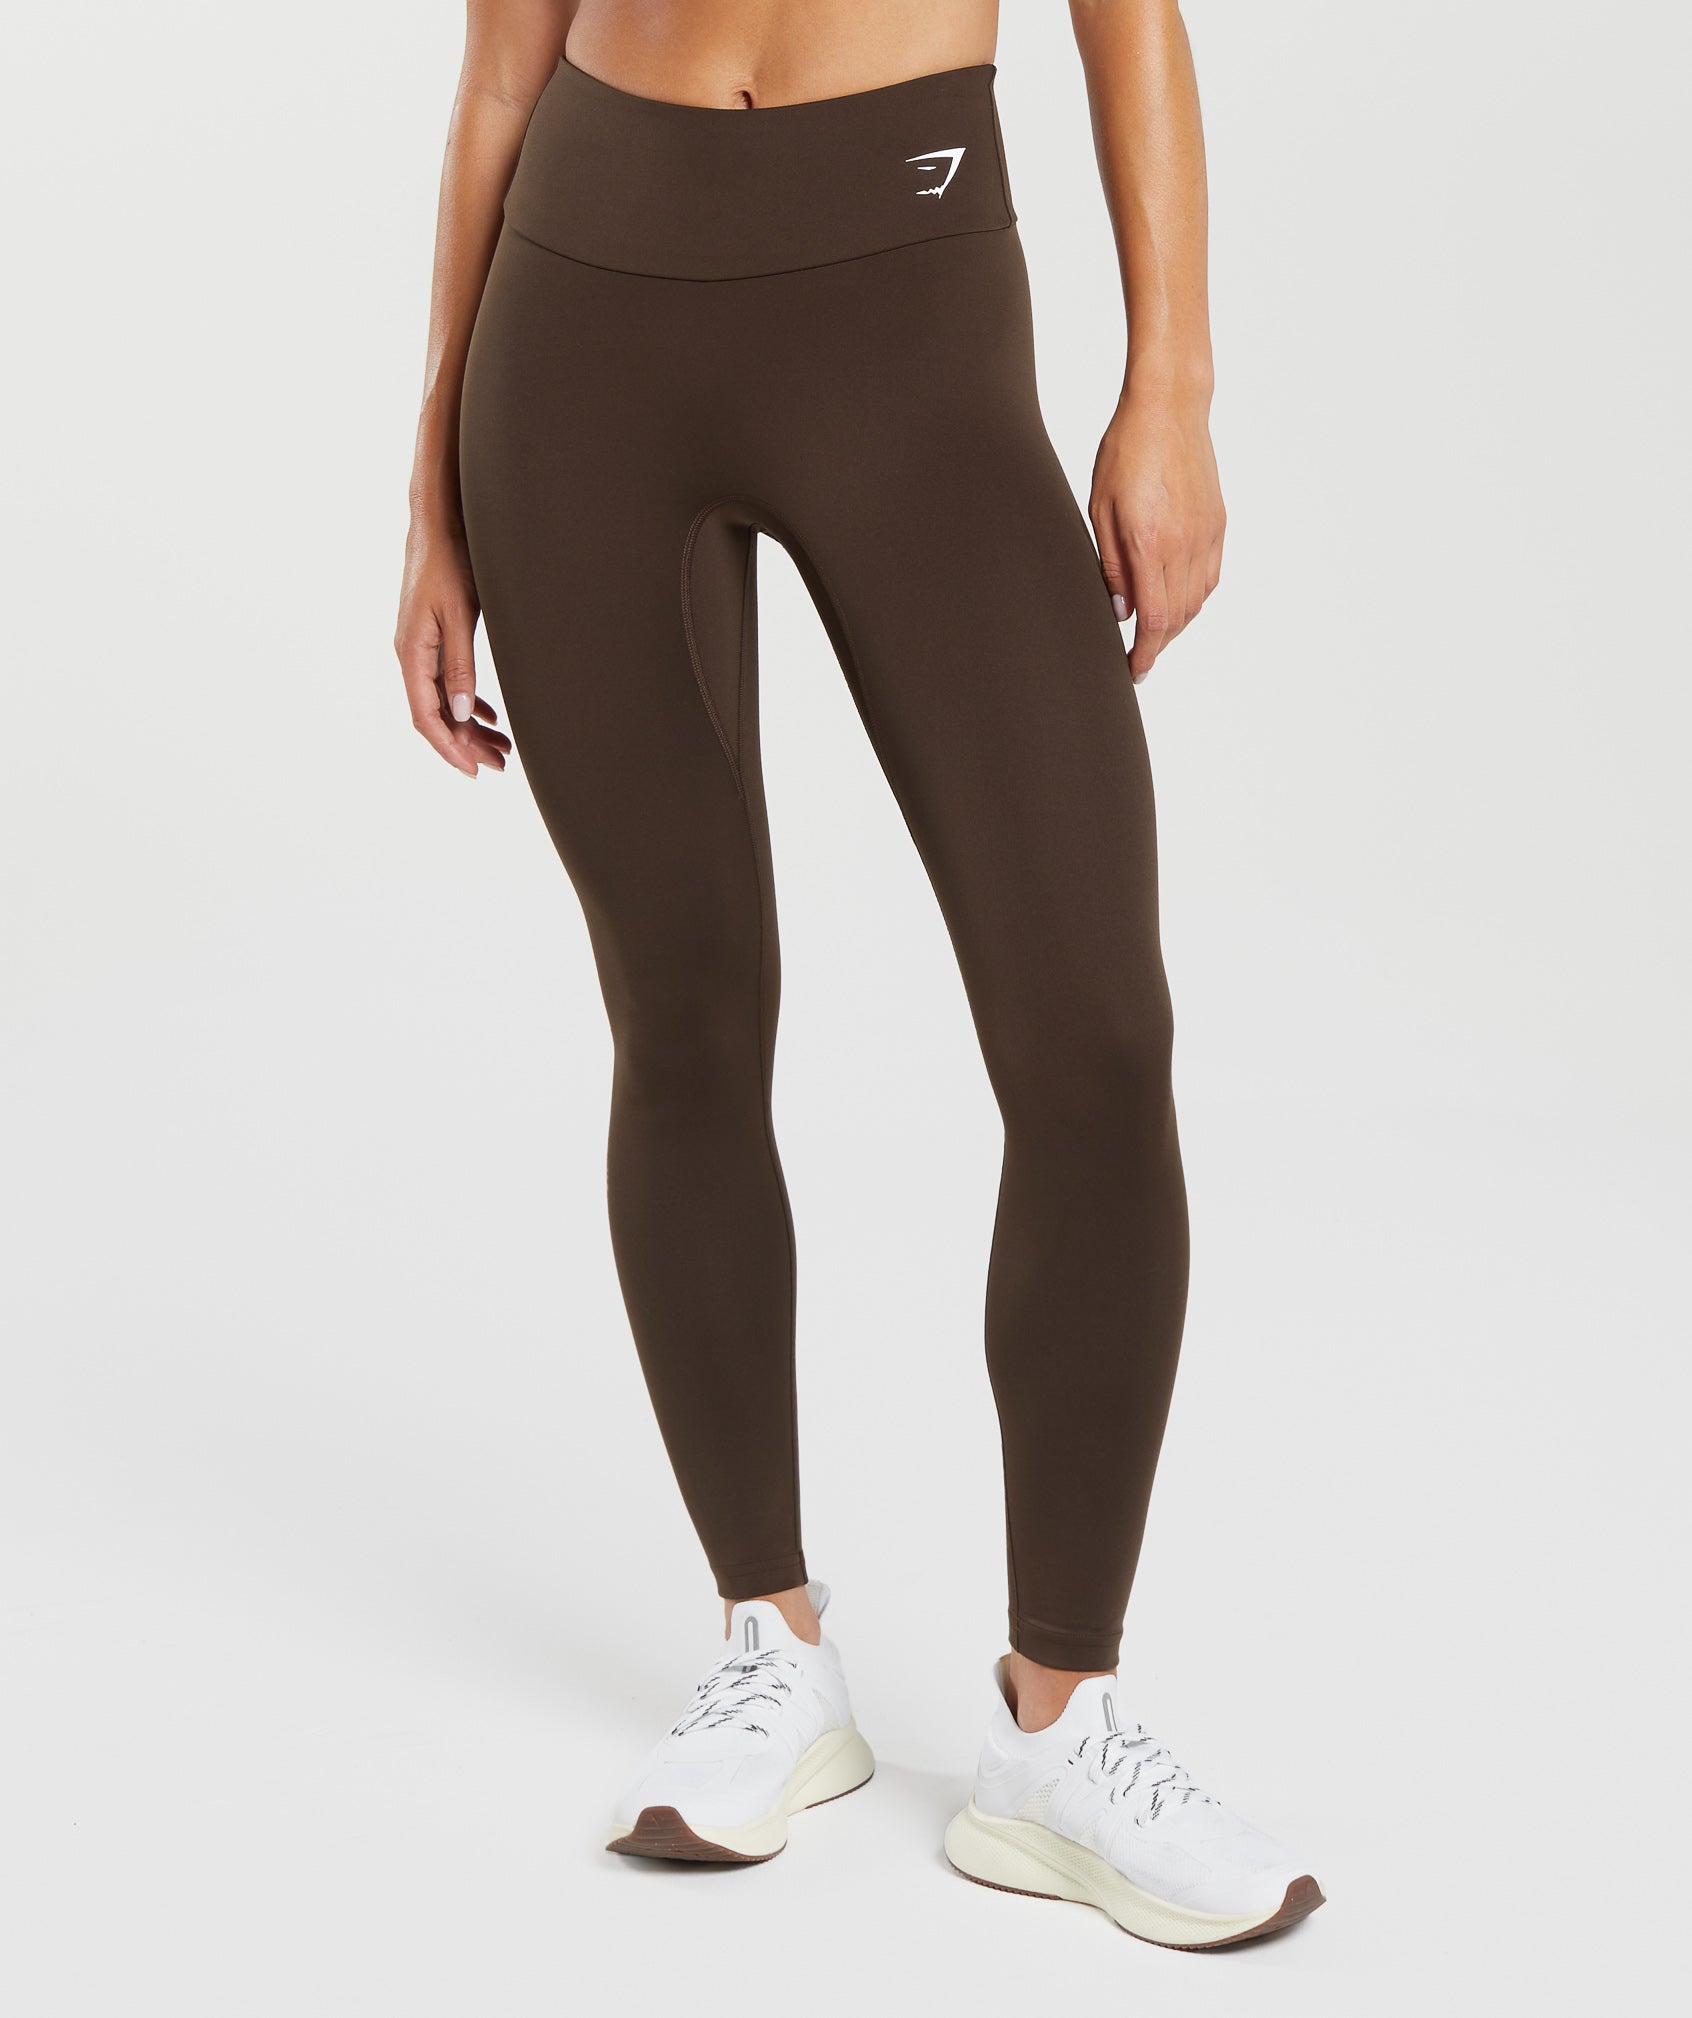 Fraction Leggings in Archive Brown - view 2